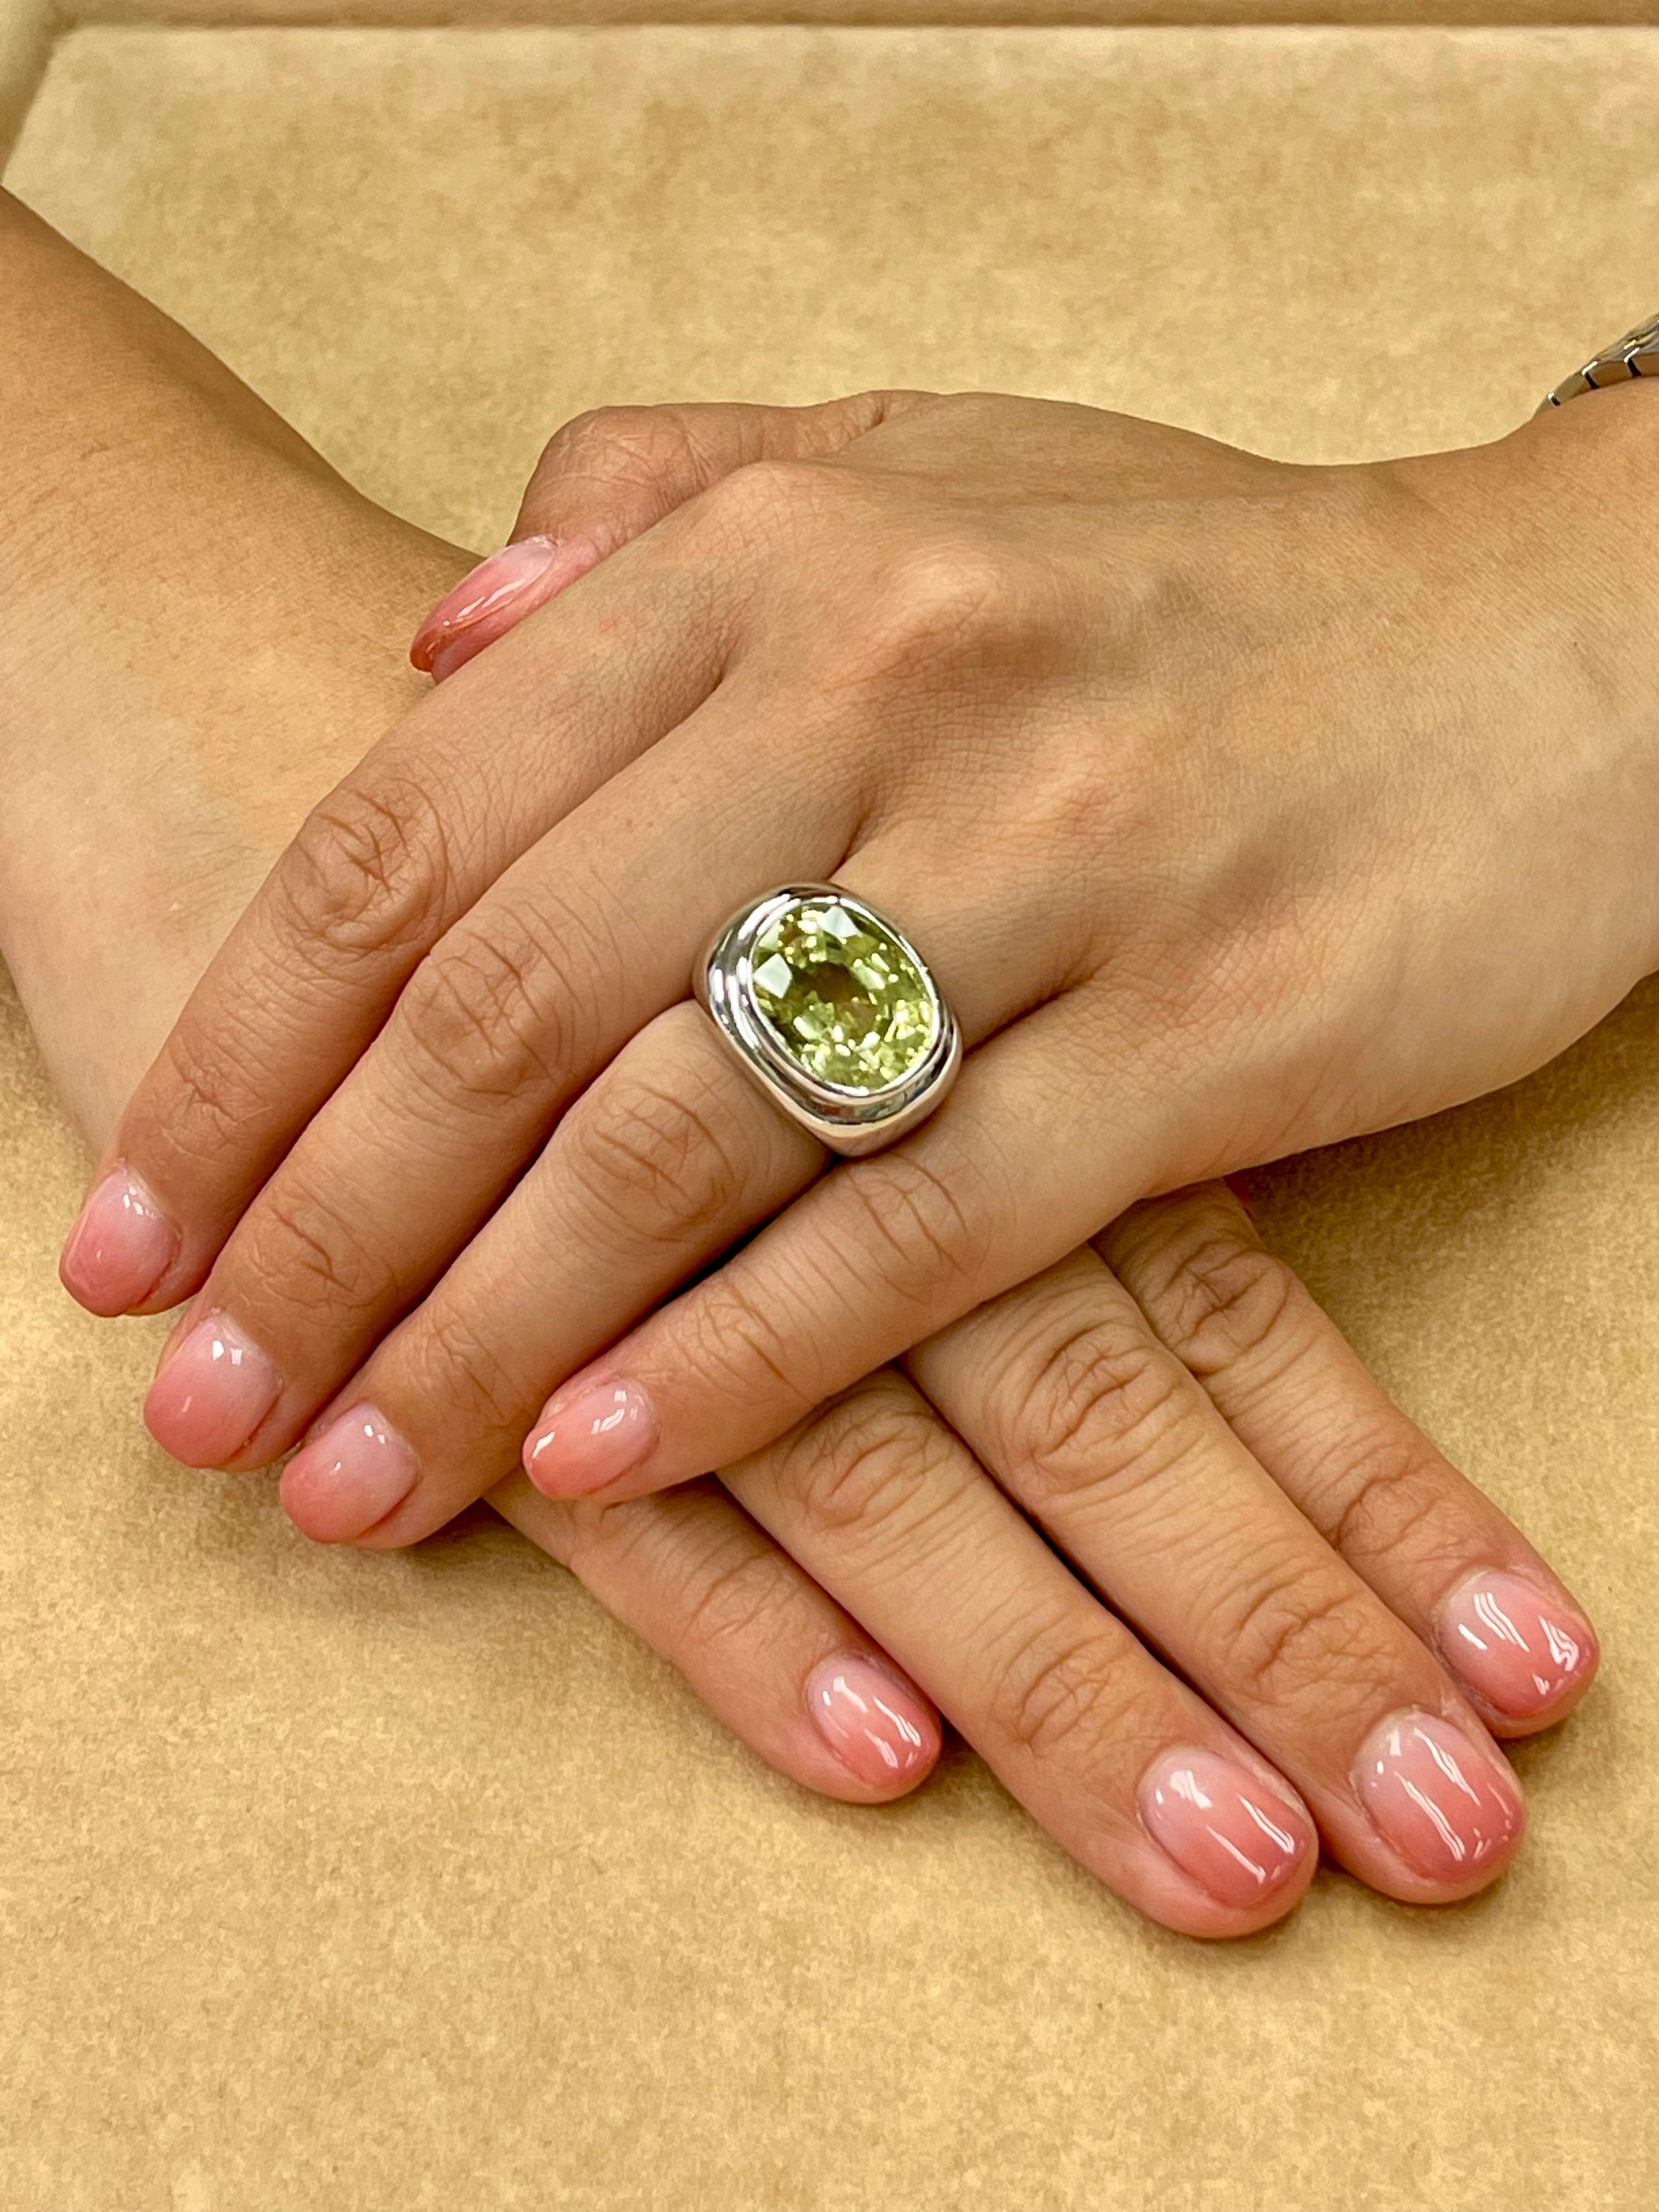 Please check out the HD video. New Old Stock. This is a unisex ring. The kunzite is a very nice yellow green! This Kuzite statement ring will get you tons of compliments. The center stone is about 13.5cts. The ring is set in solid 18k white gold.